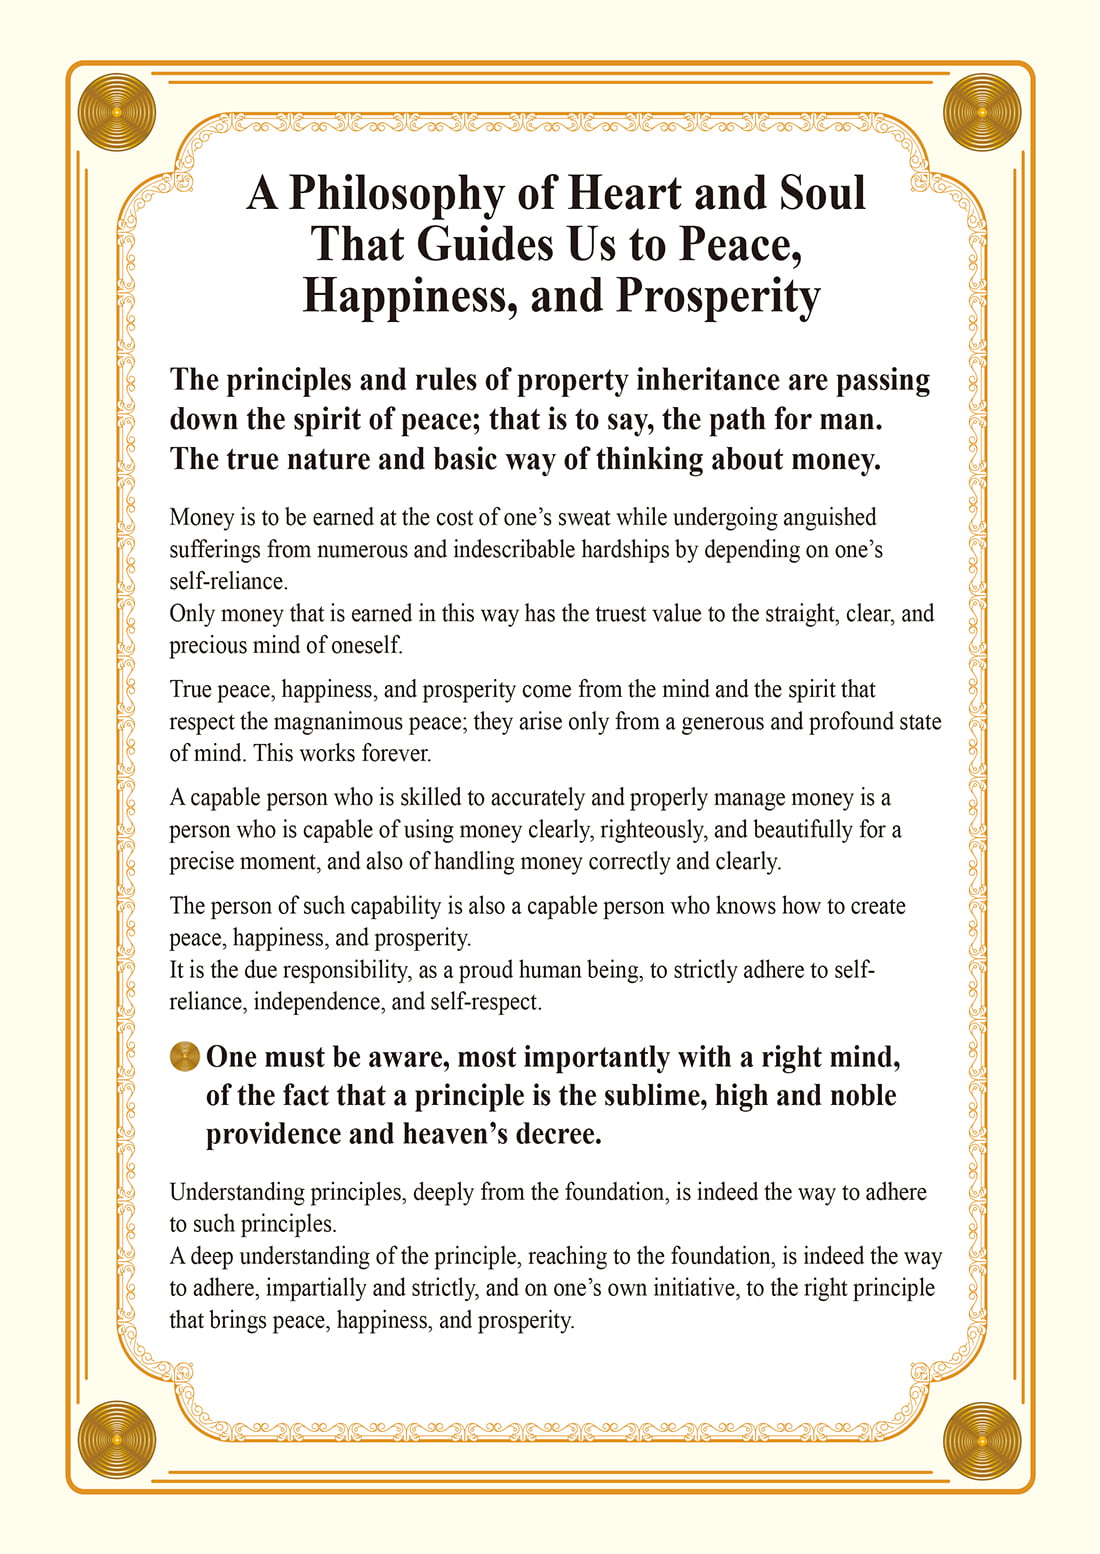 A Philosophy of Heart and Soul that Guides Us　to Peace, Happiness, and Prosperity01